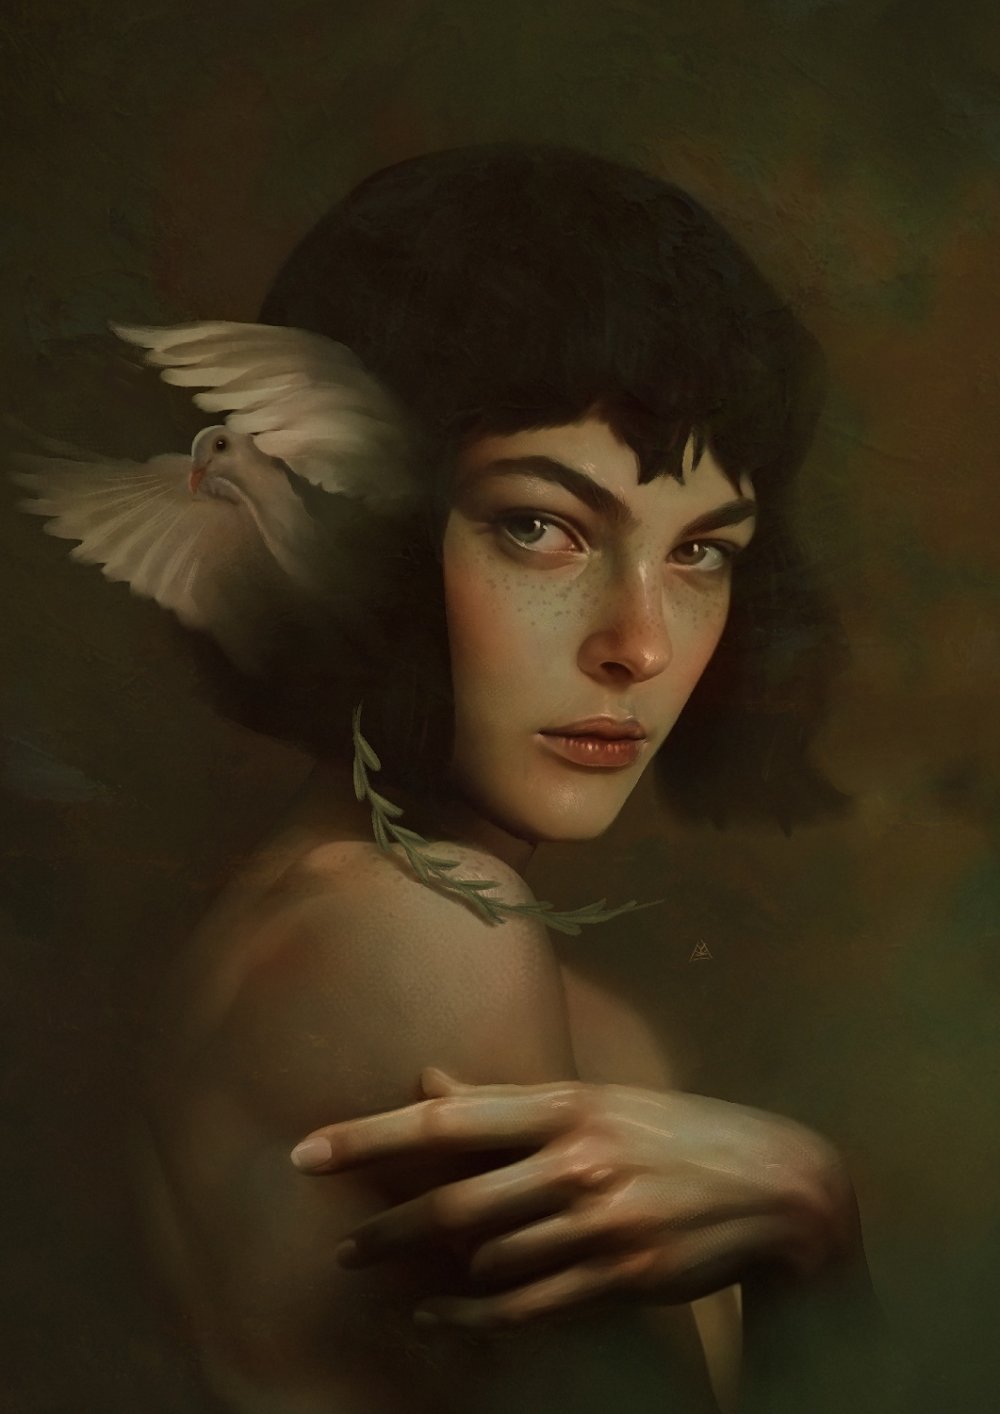 Awesome Surreal Illustrations And Digital Paintings By Aykut Aydogdu 16